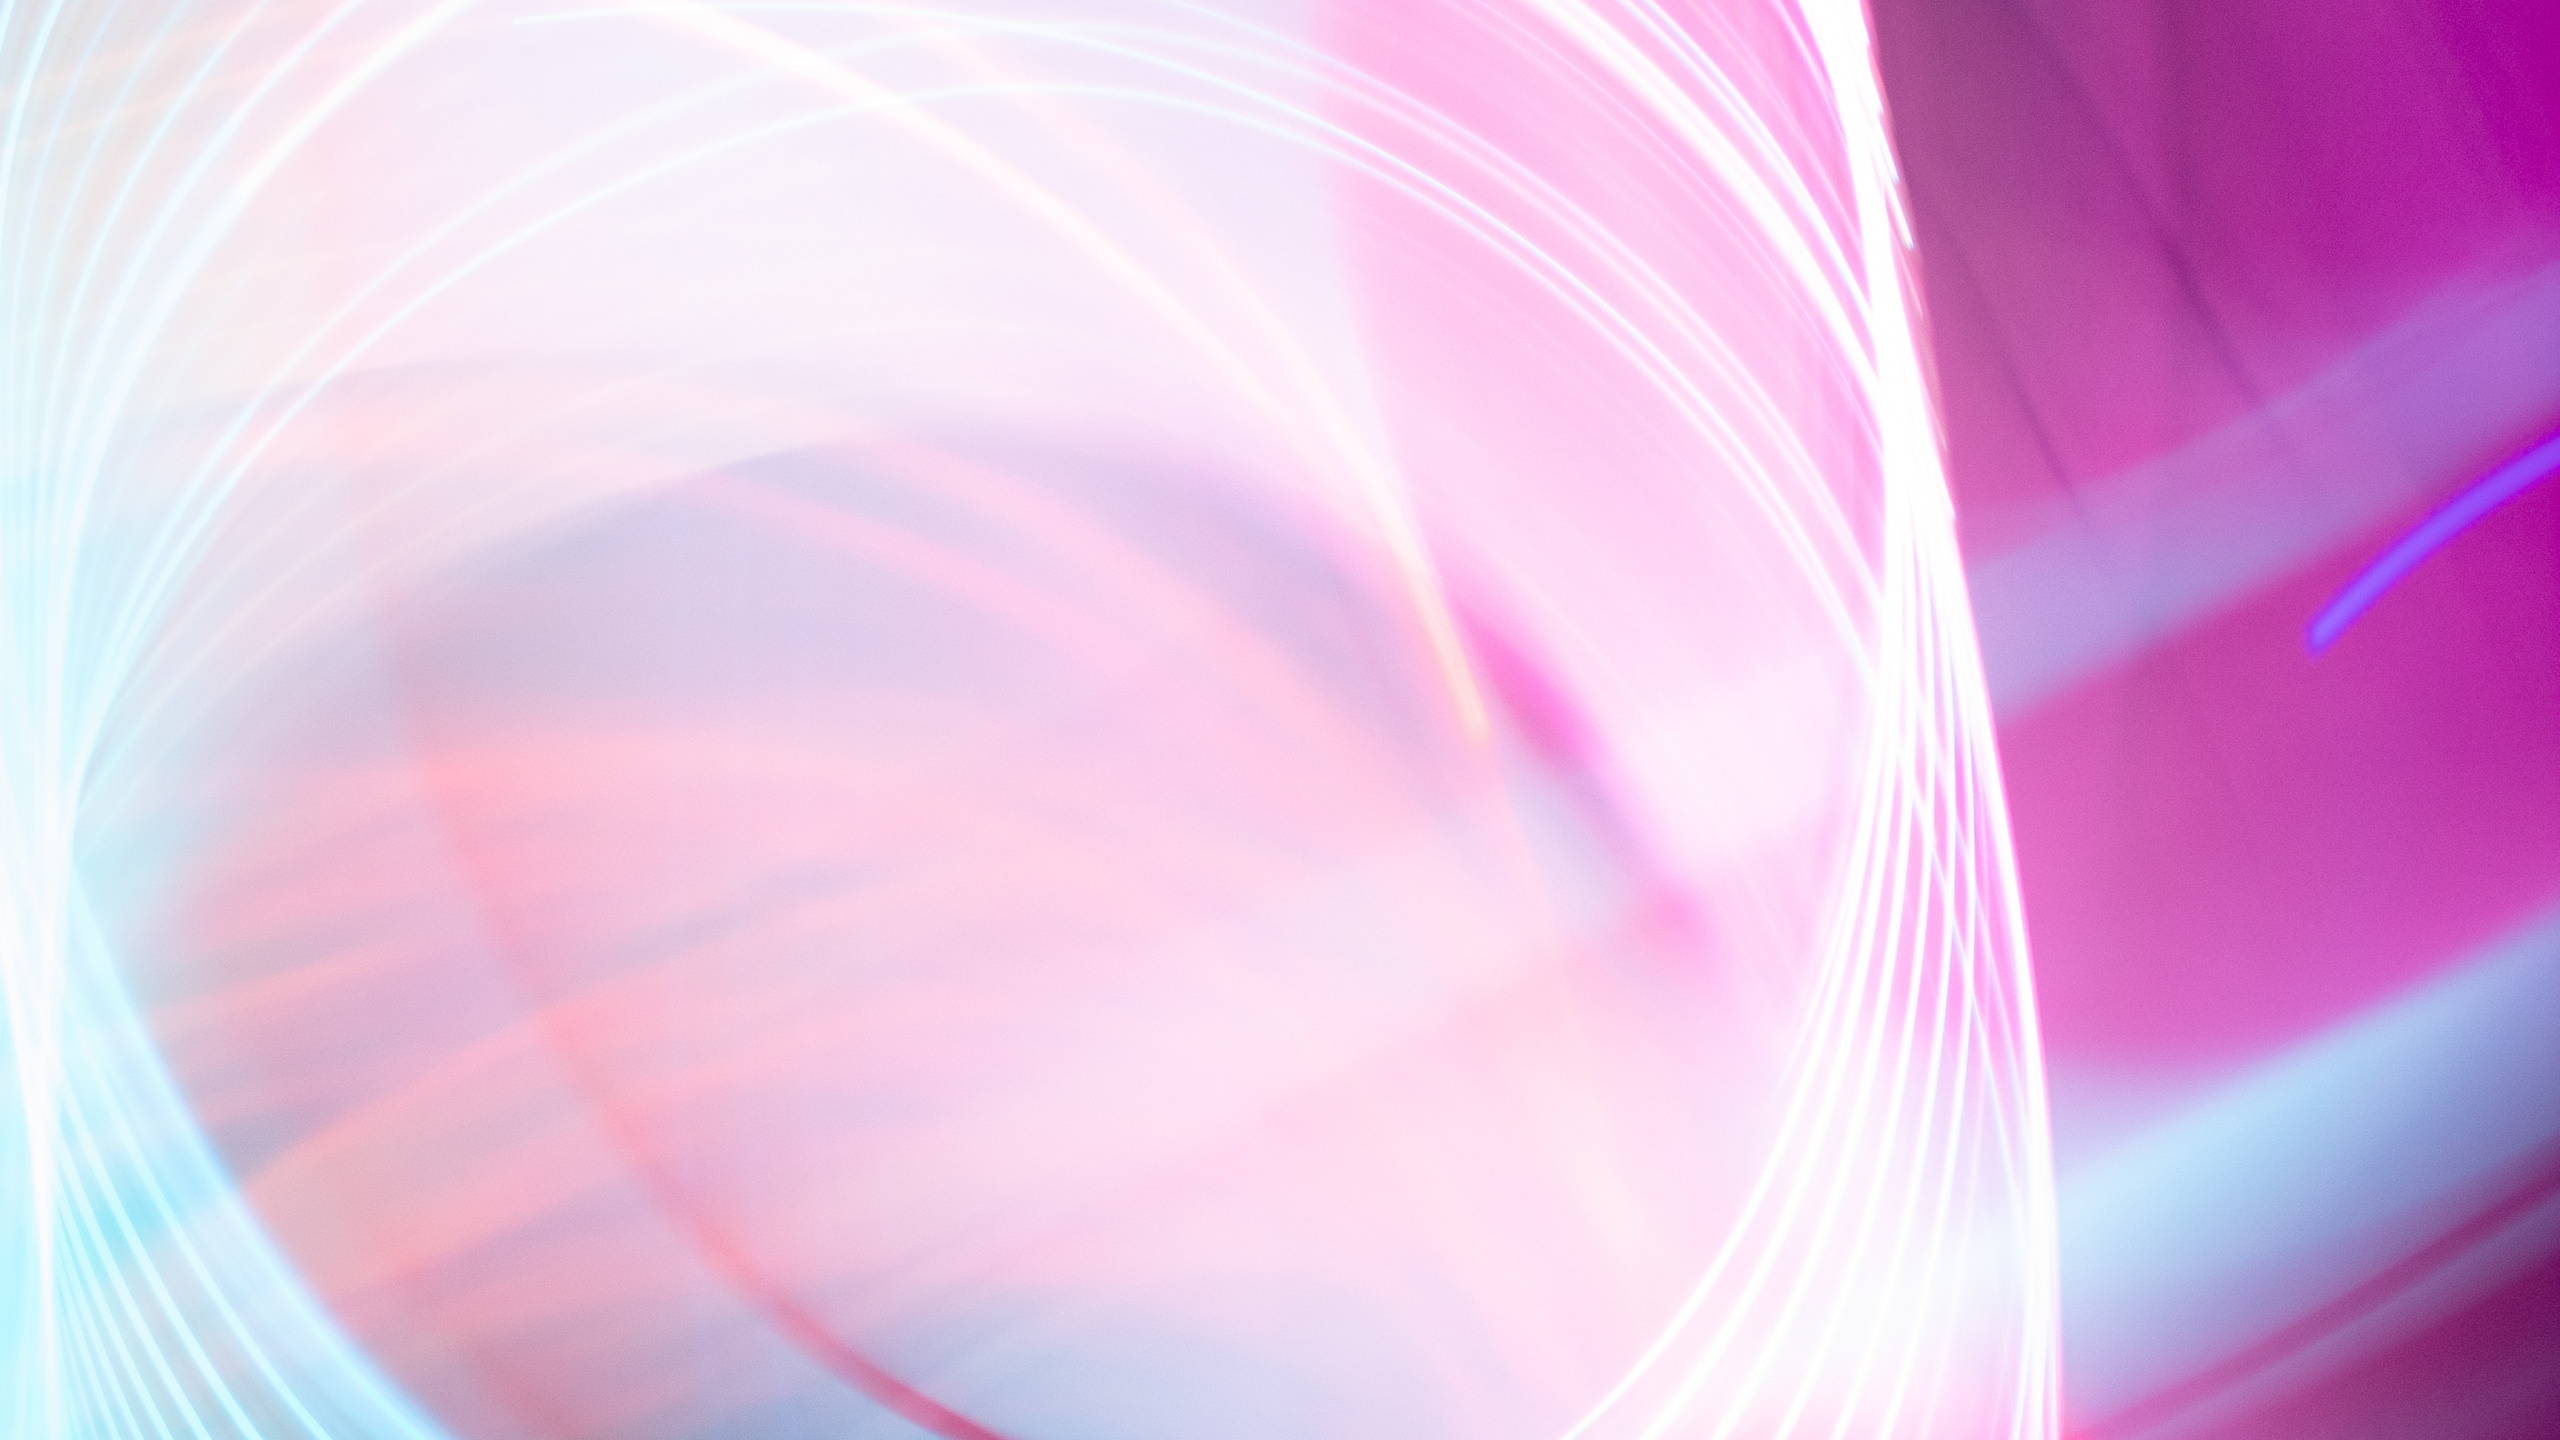 Pink and White Light Digital Wallpaper. Wallpaper in 2560x1440 Resolution